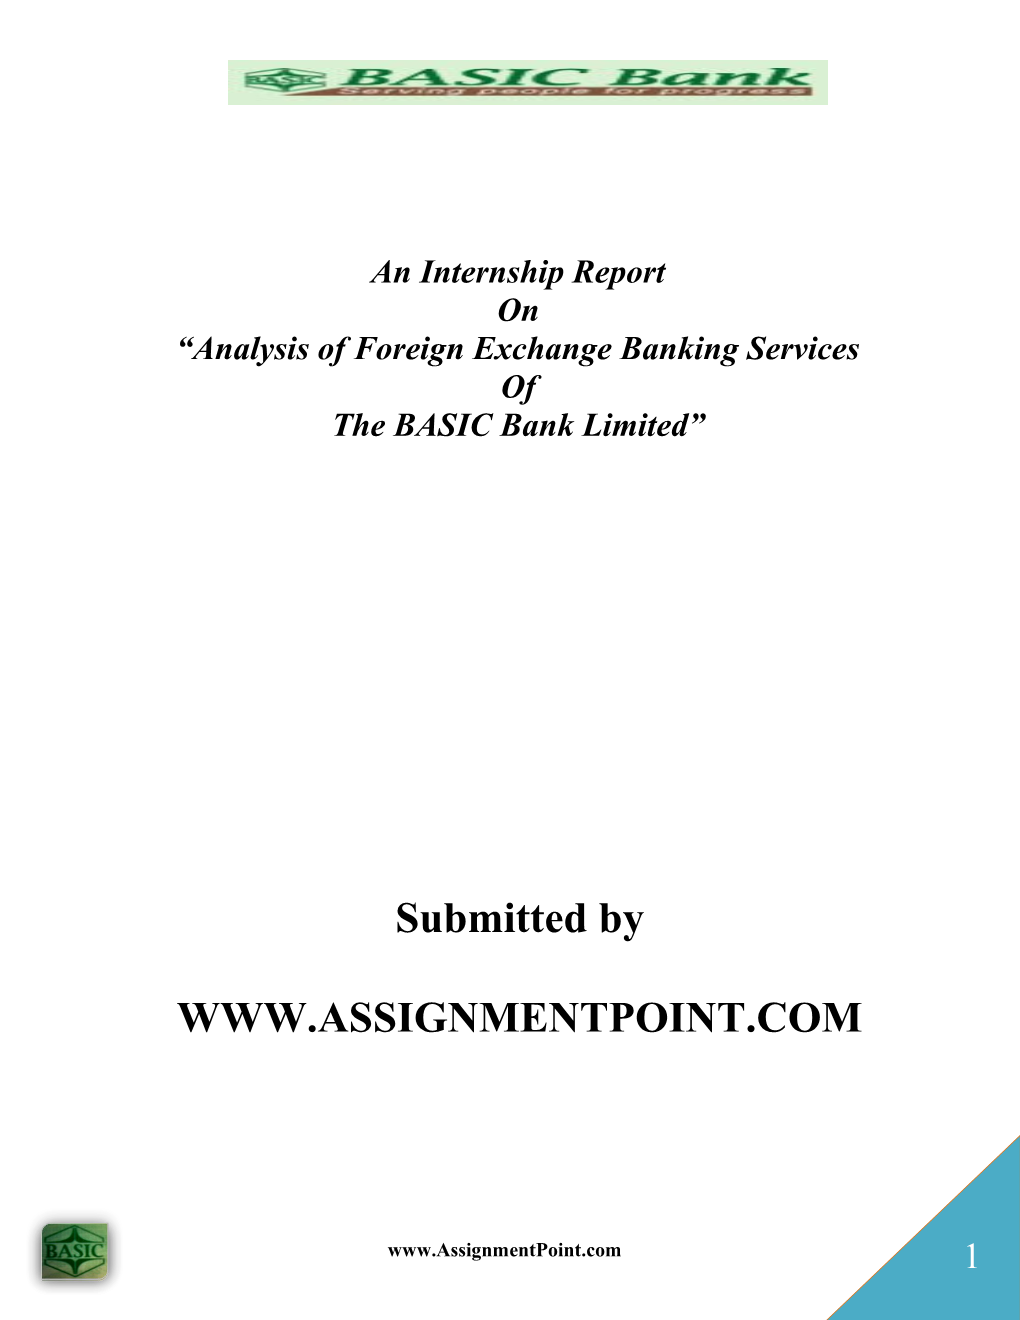 Analysis of Foreign Exchange Banking Services